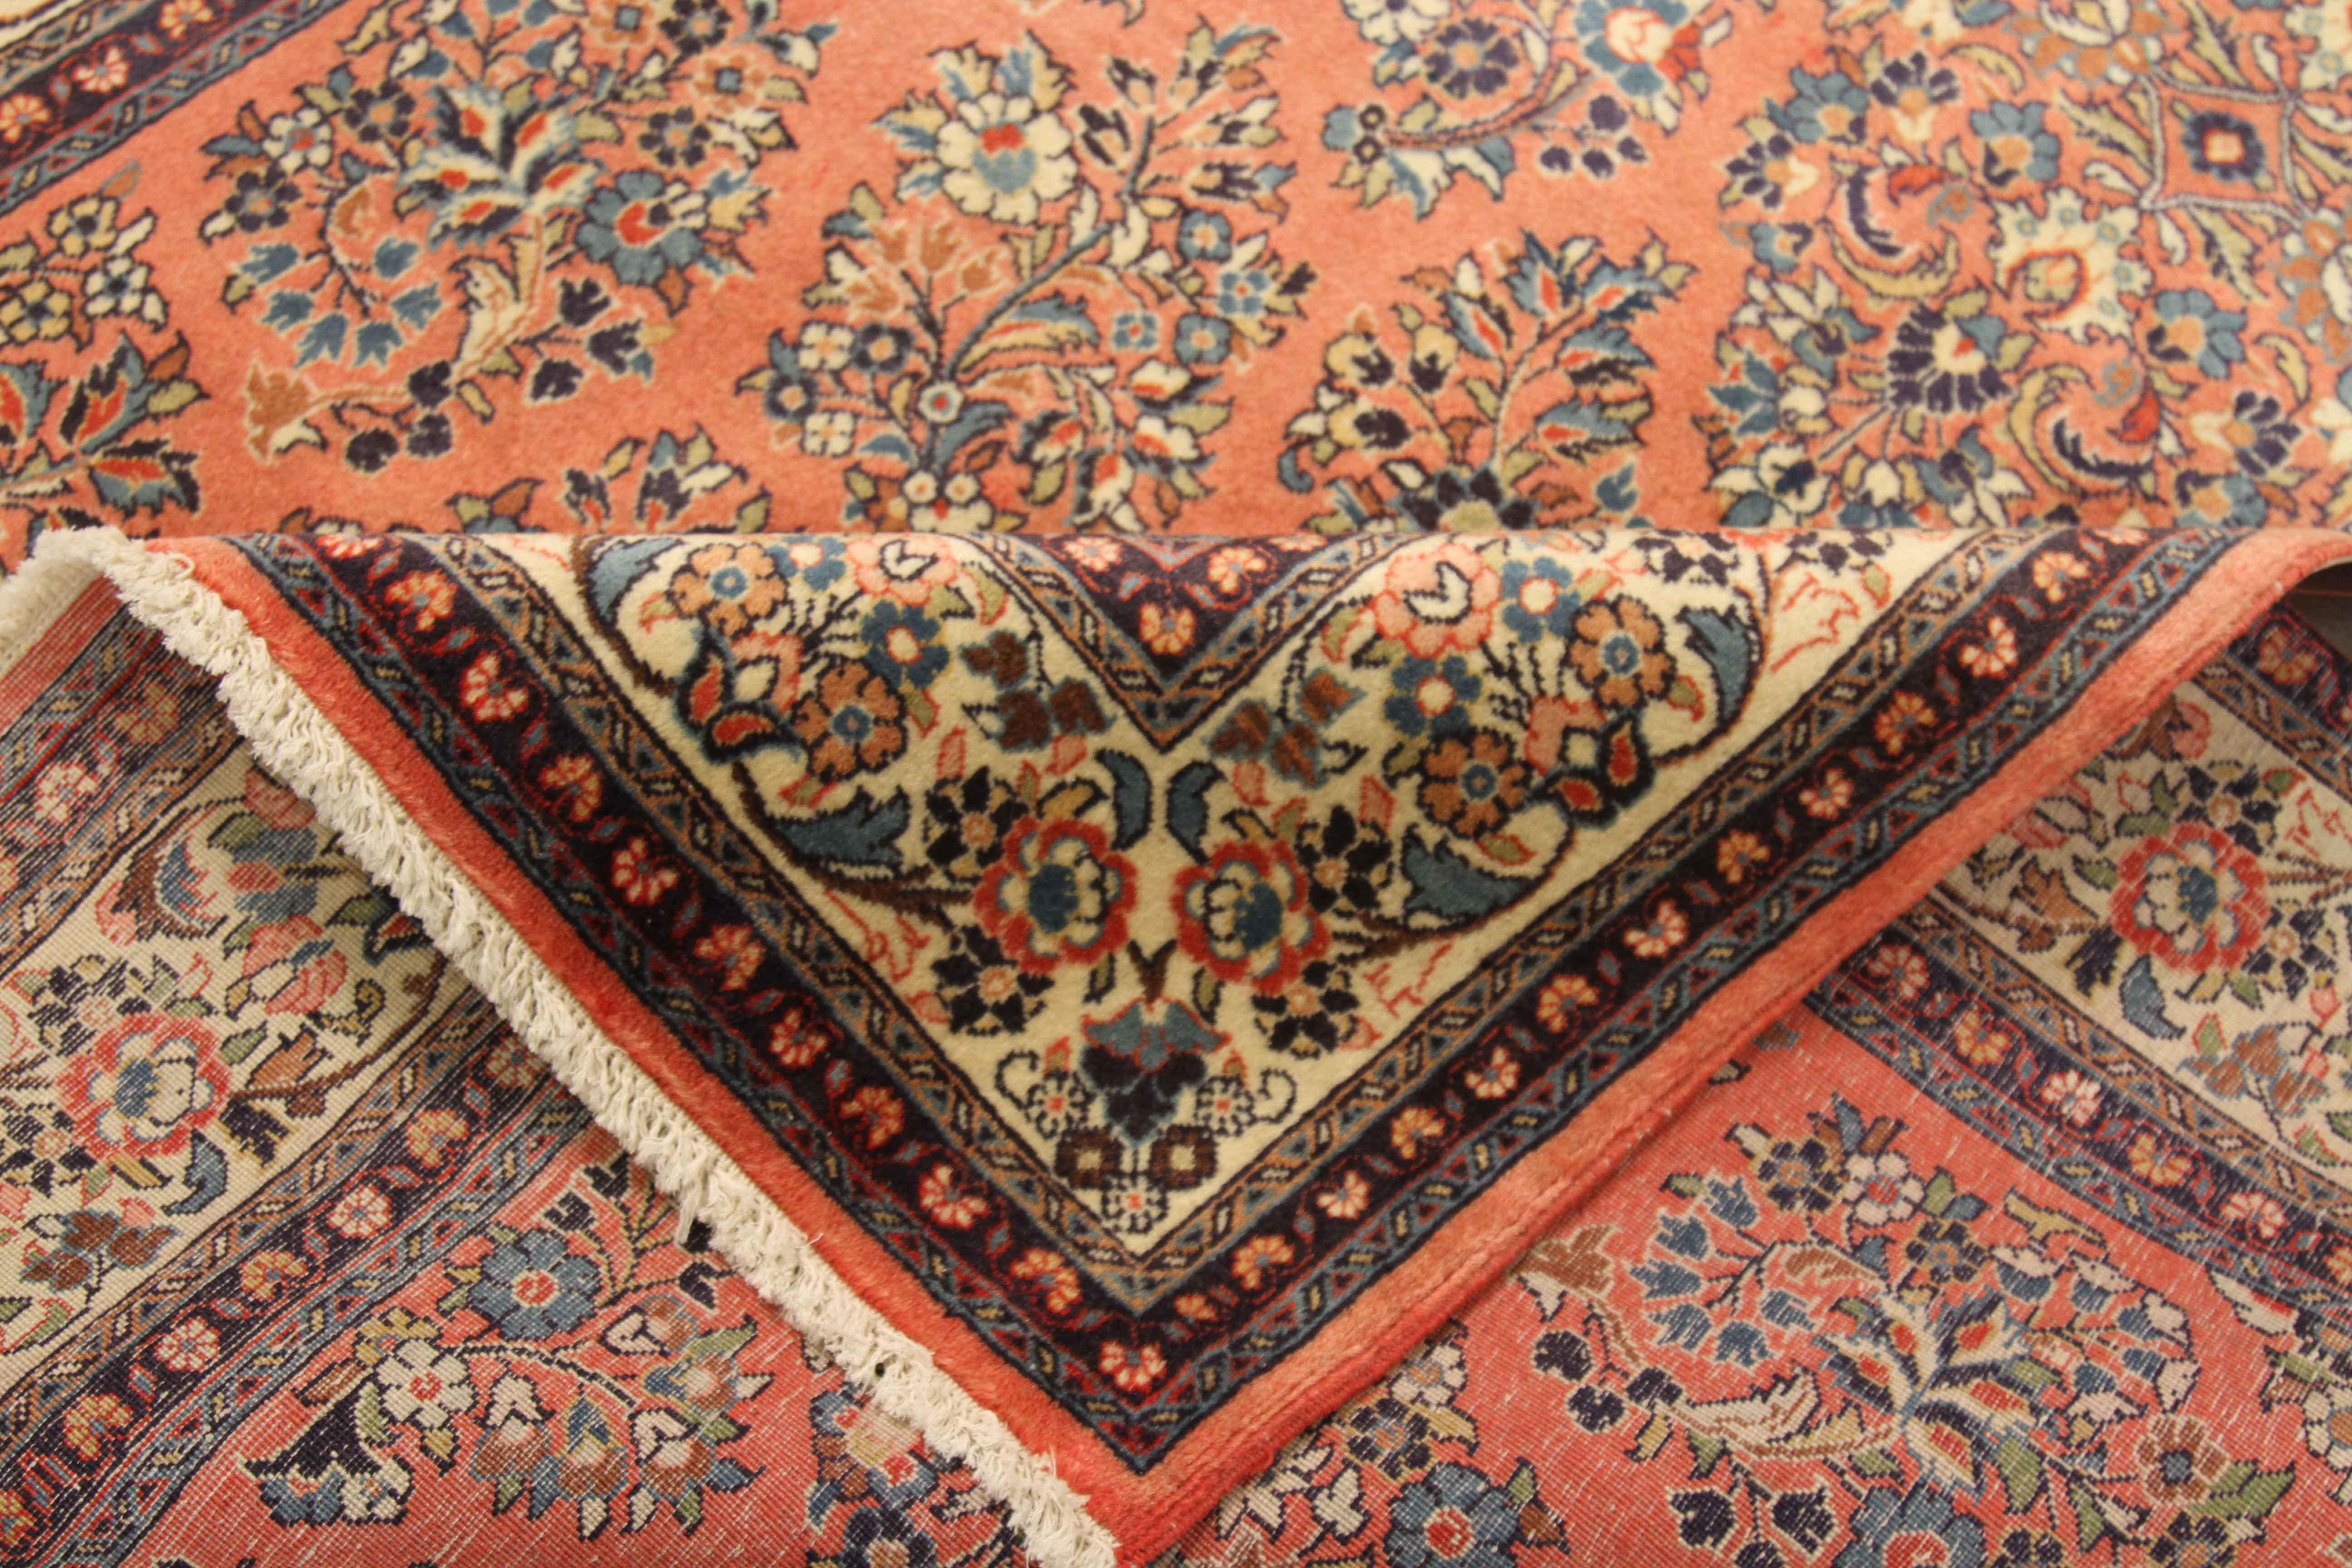 Antique Persian rug handwoven from the finest sheep’s wool and colored with all-natural vegetable dyes that are safe for humans and pets. It’s a traditional Sarouk design featuring flower heads using a lovely mix of blue and ivory. It has a red